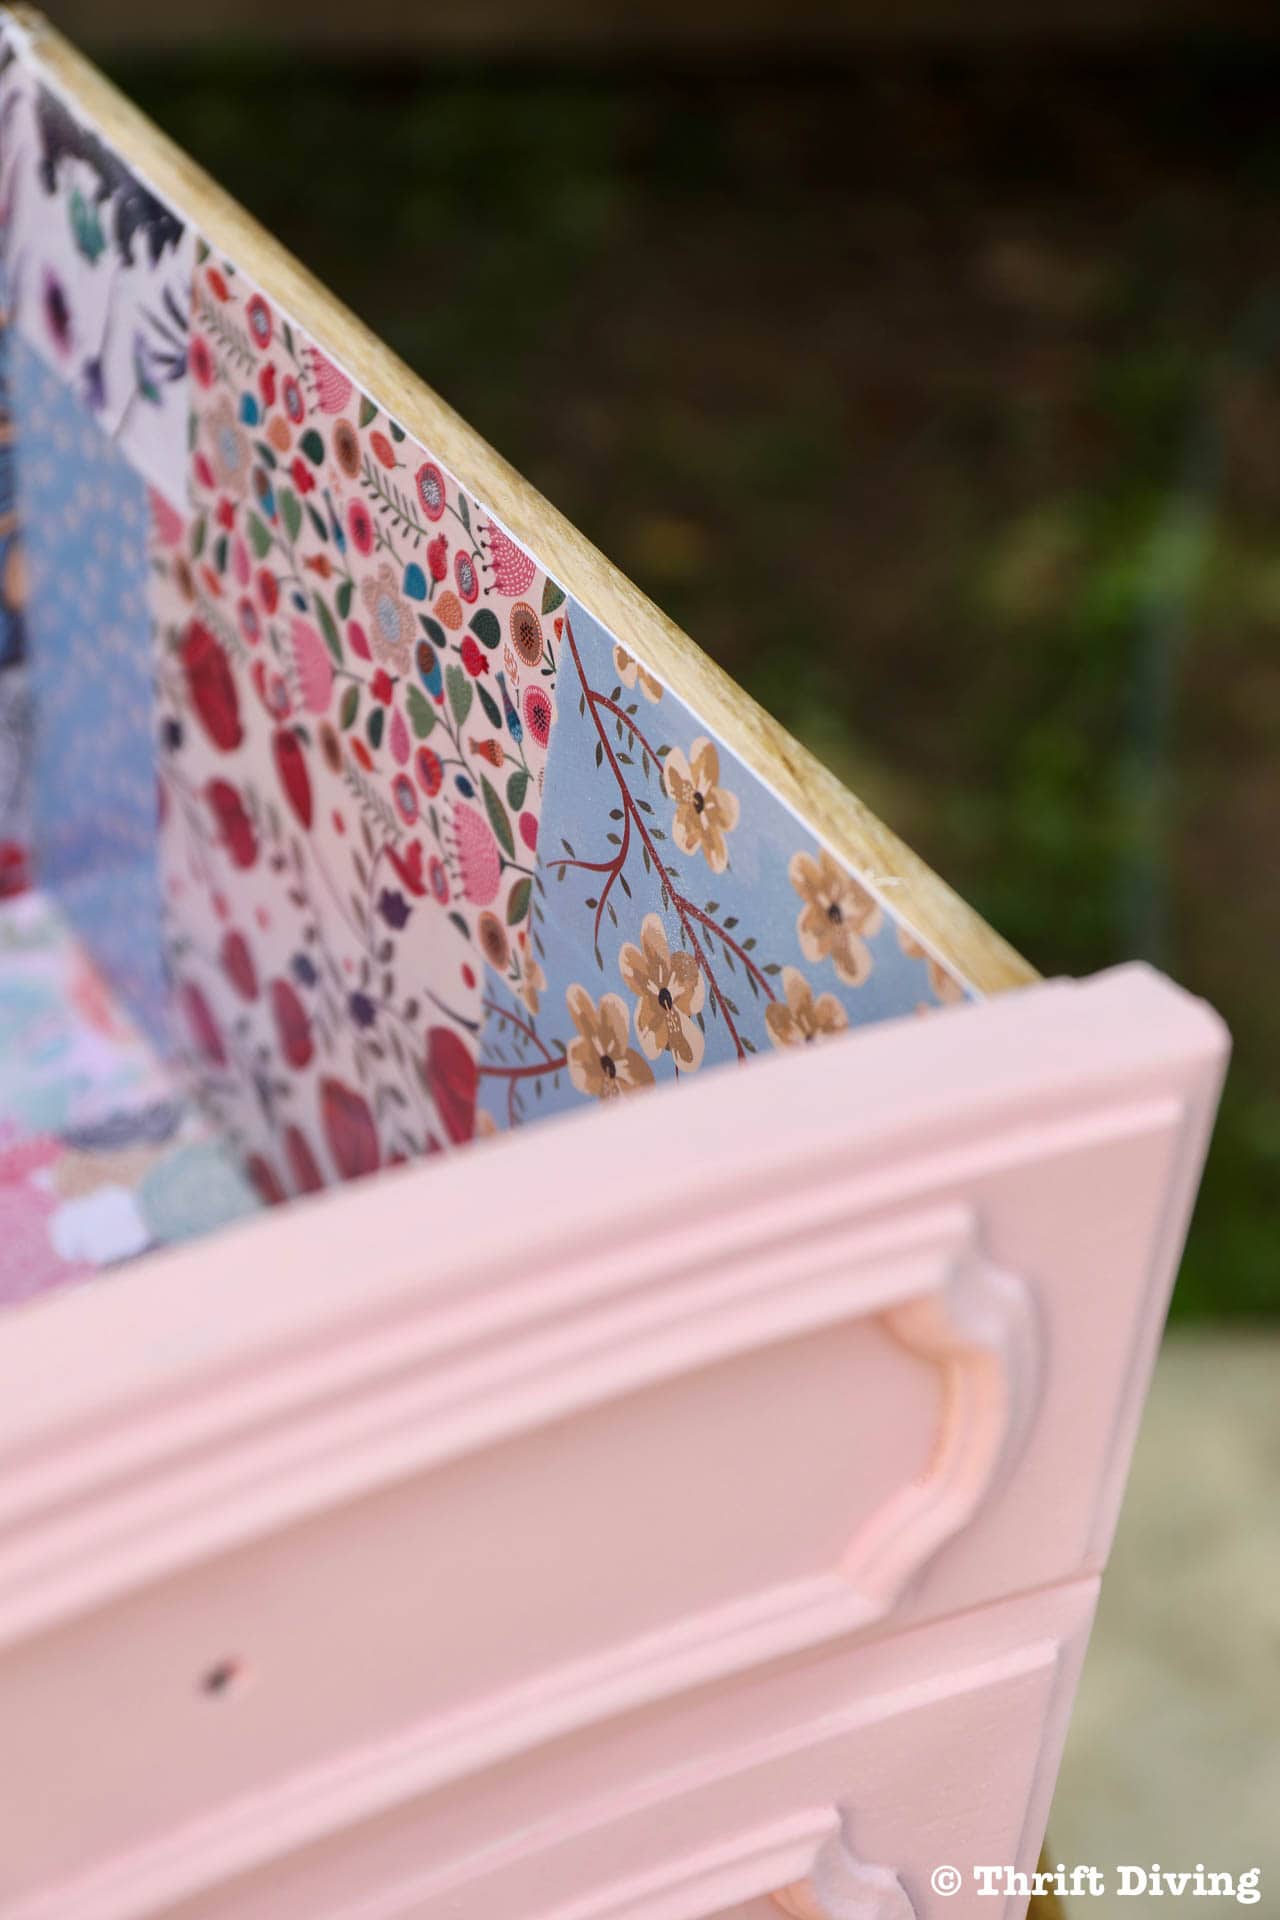 https://thriftdiving.com/wp-content/uploads/2018/05/How-to-Line-Drawers-With-Scrapbook-Paper-2.jpg